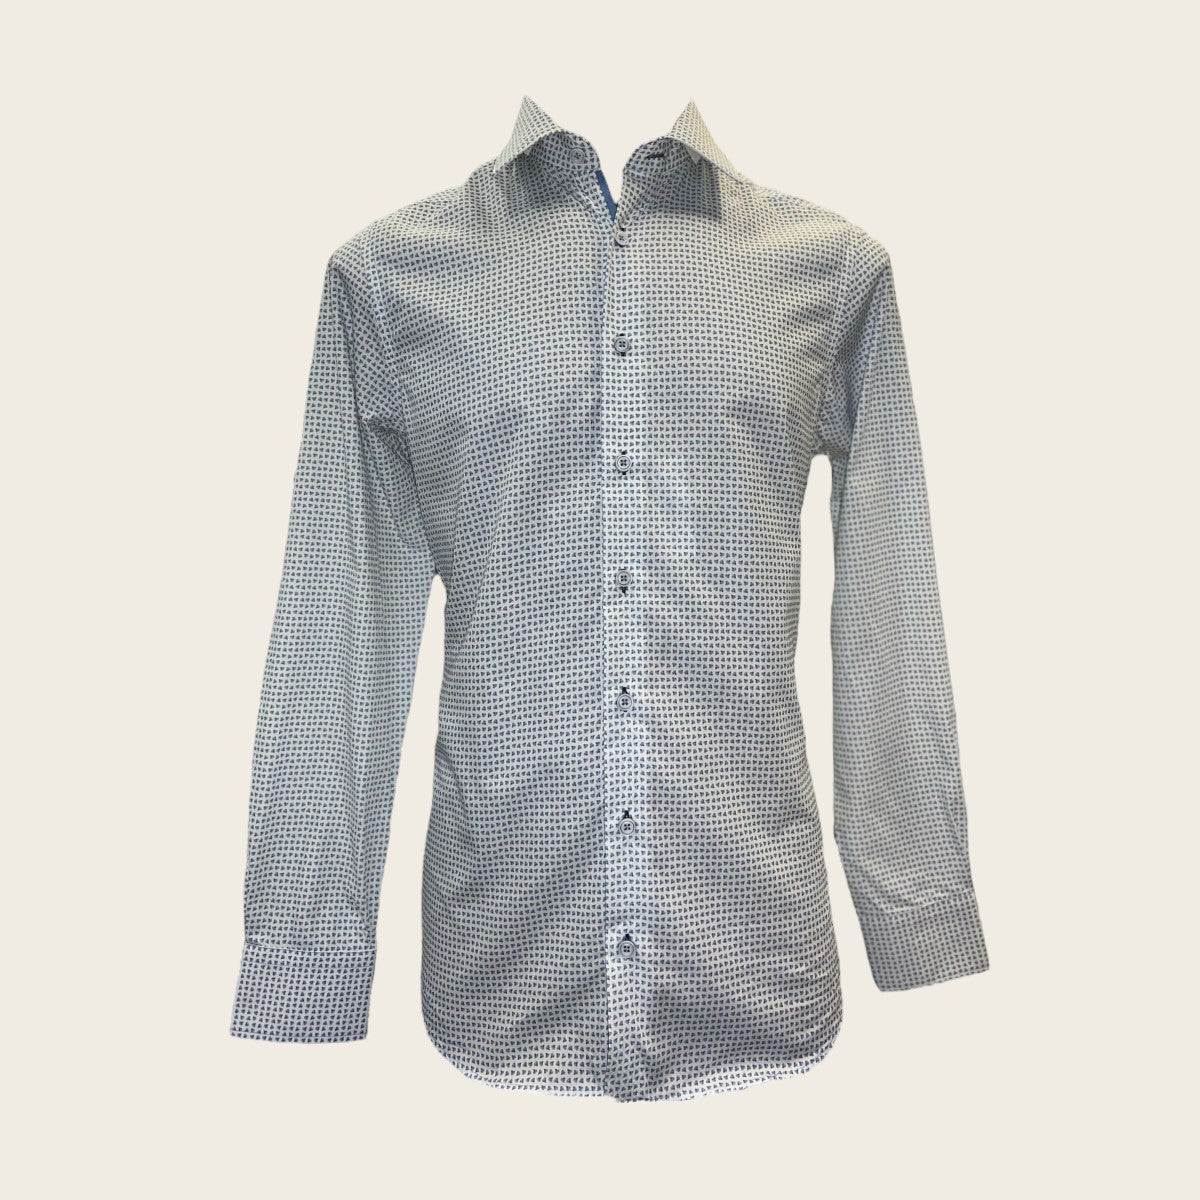 Cuadra shirt has long sleeves and boasts button-down front and cuff closures.